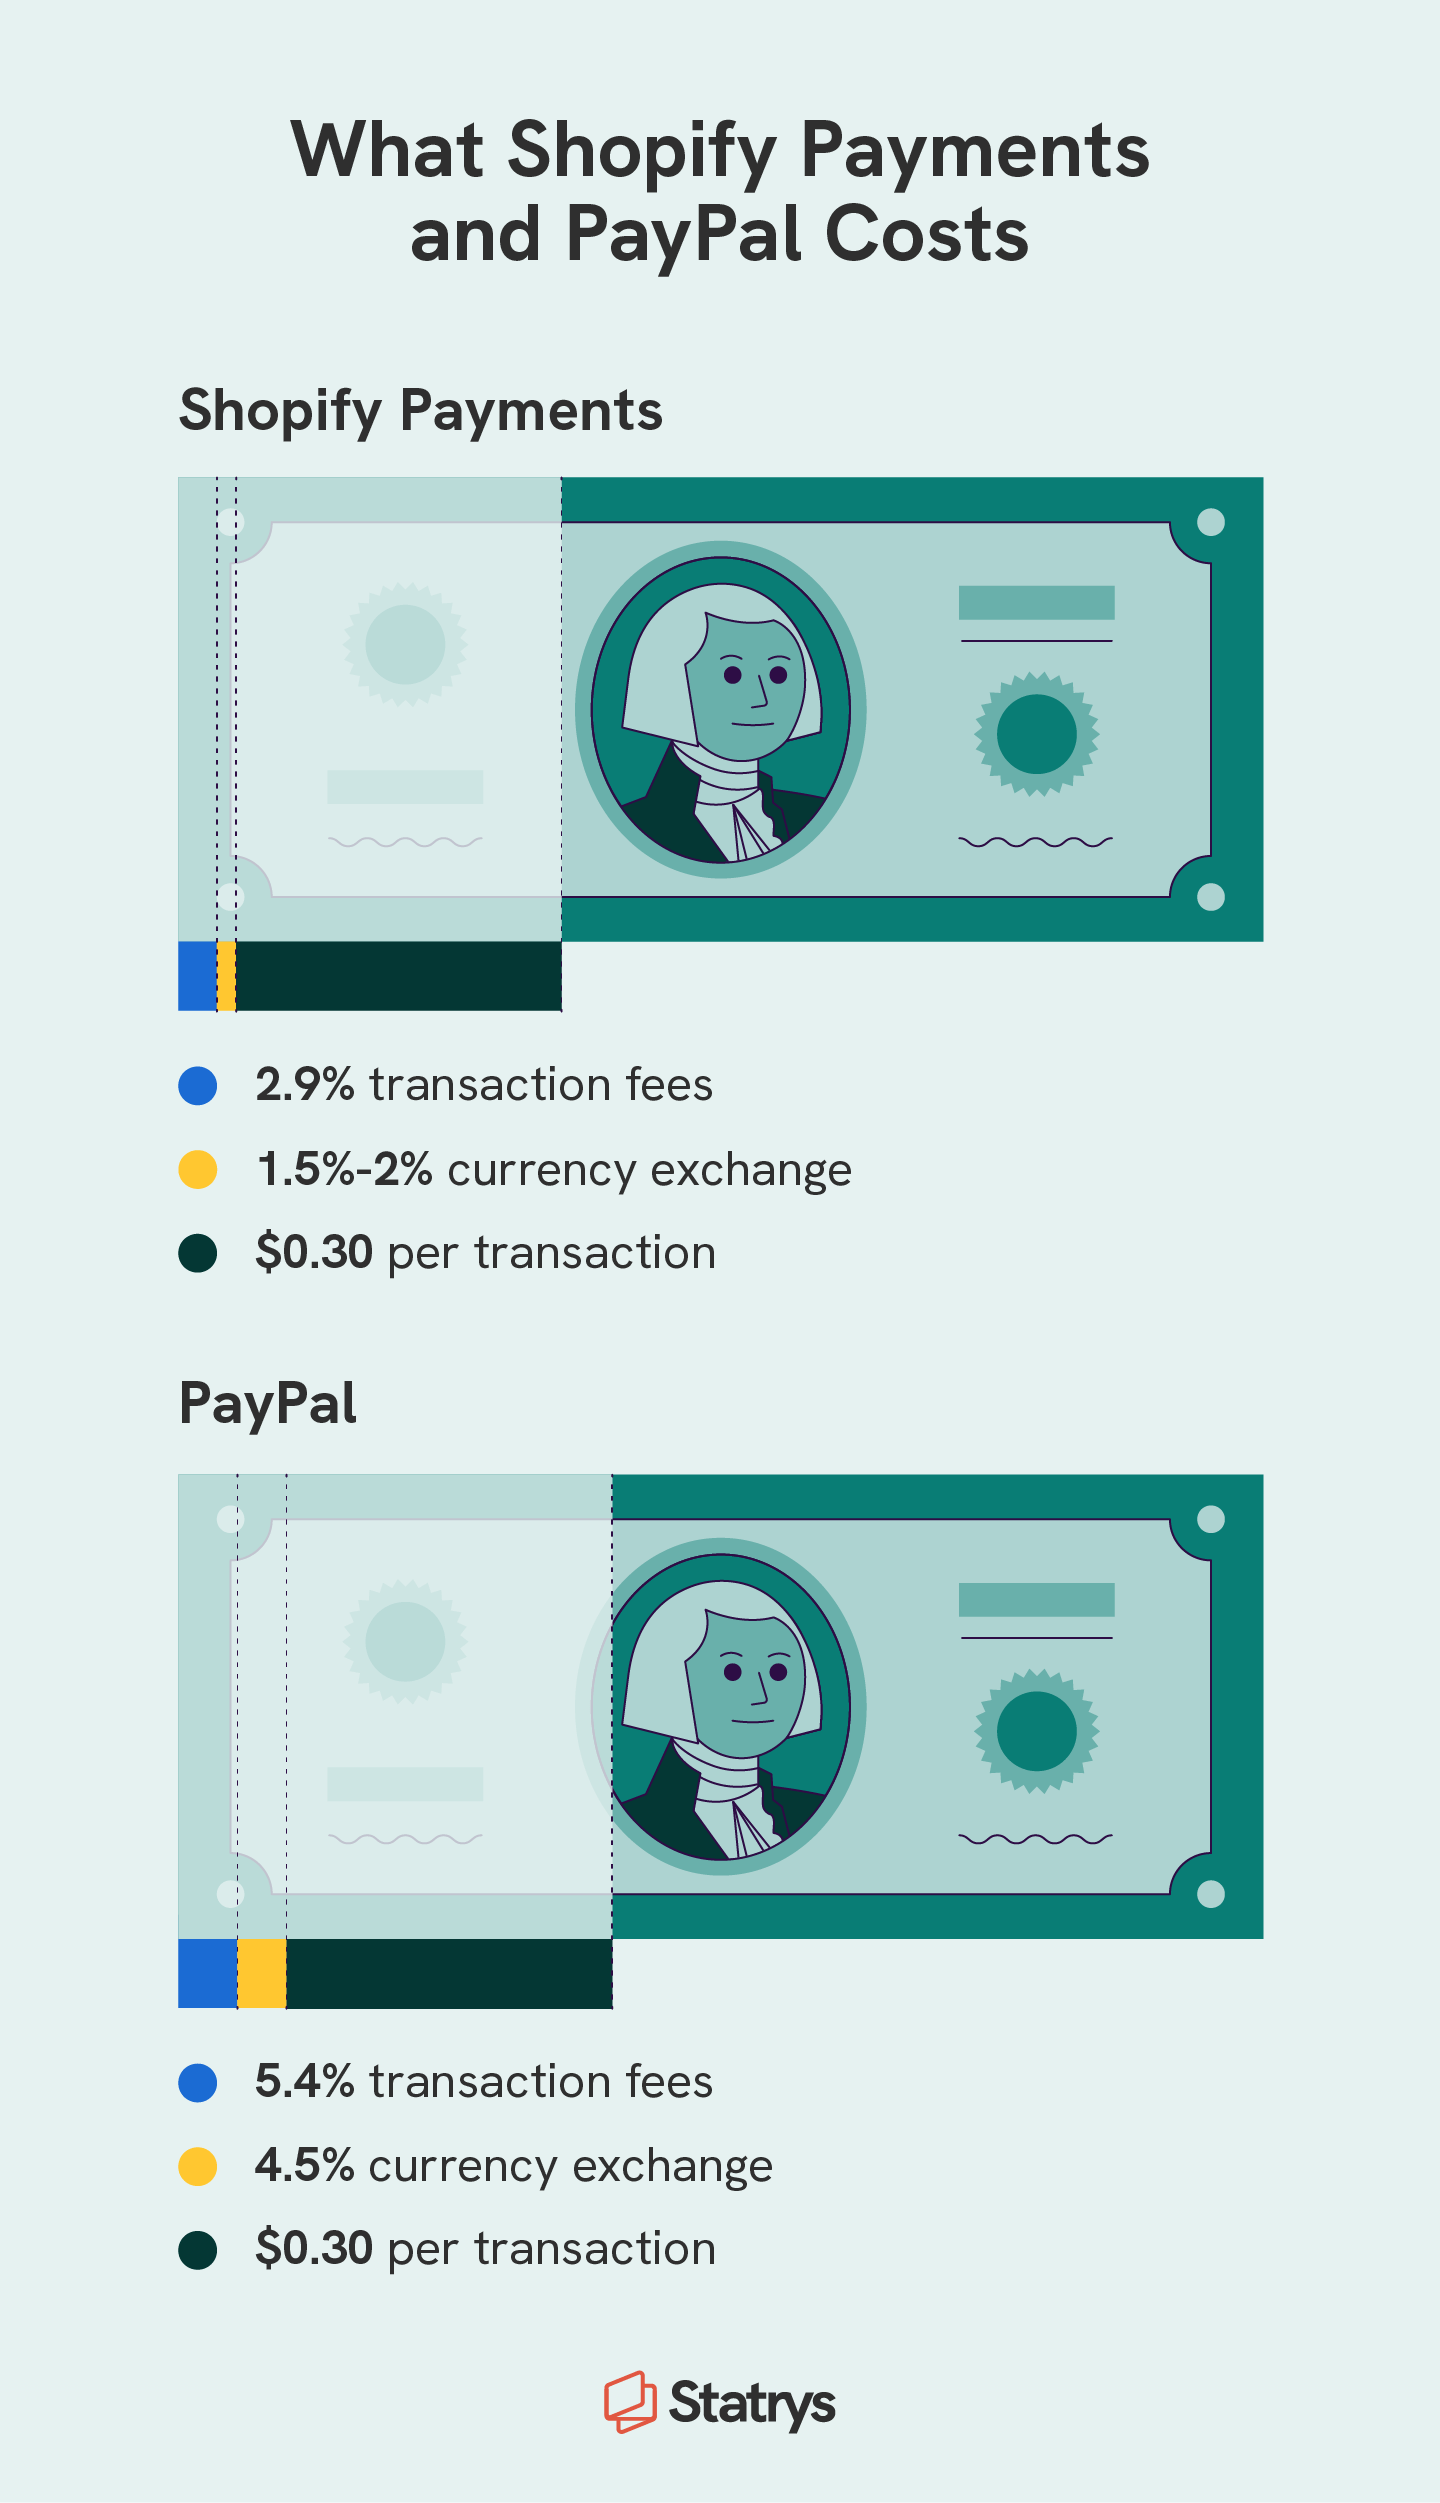 Two dollar bills with the percentage taken by Shopify Payments and PayPal in each transaction higlighte 